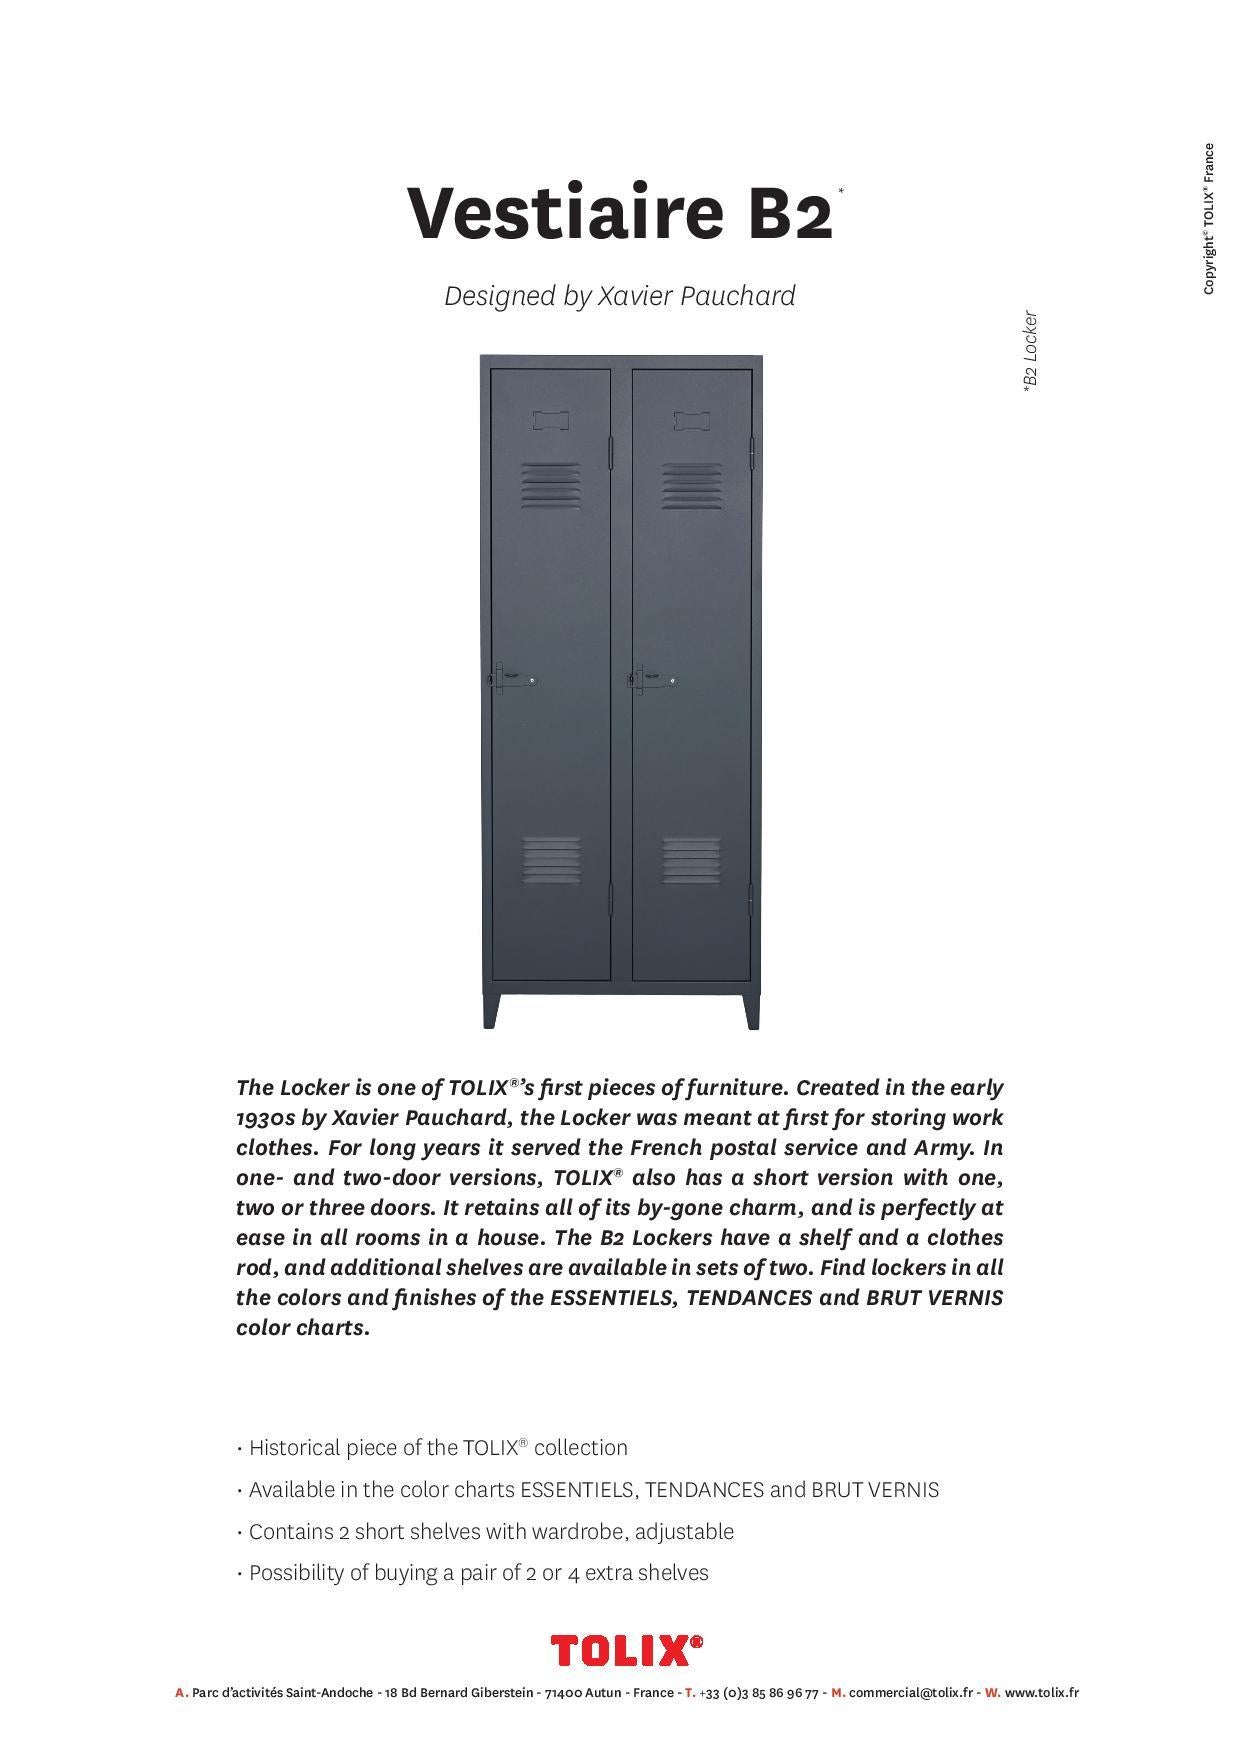 Modern B2 High Locker in Essential Colors by Xavier Pauchard and Tolix For Sale